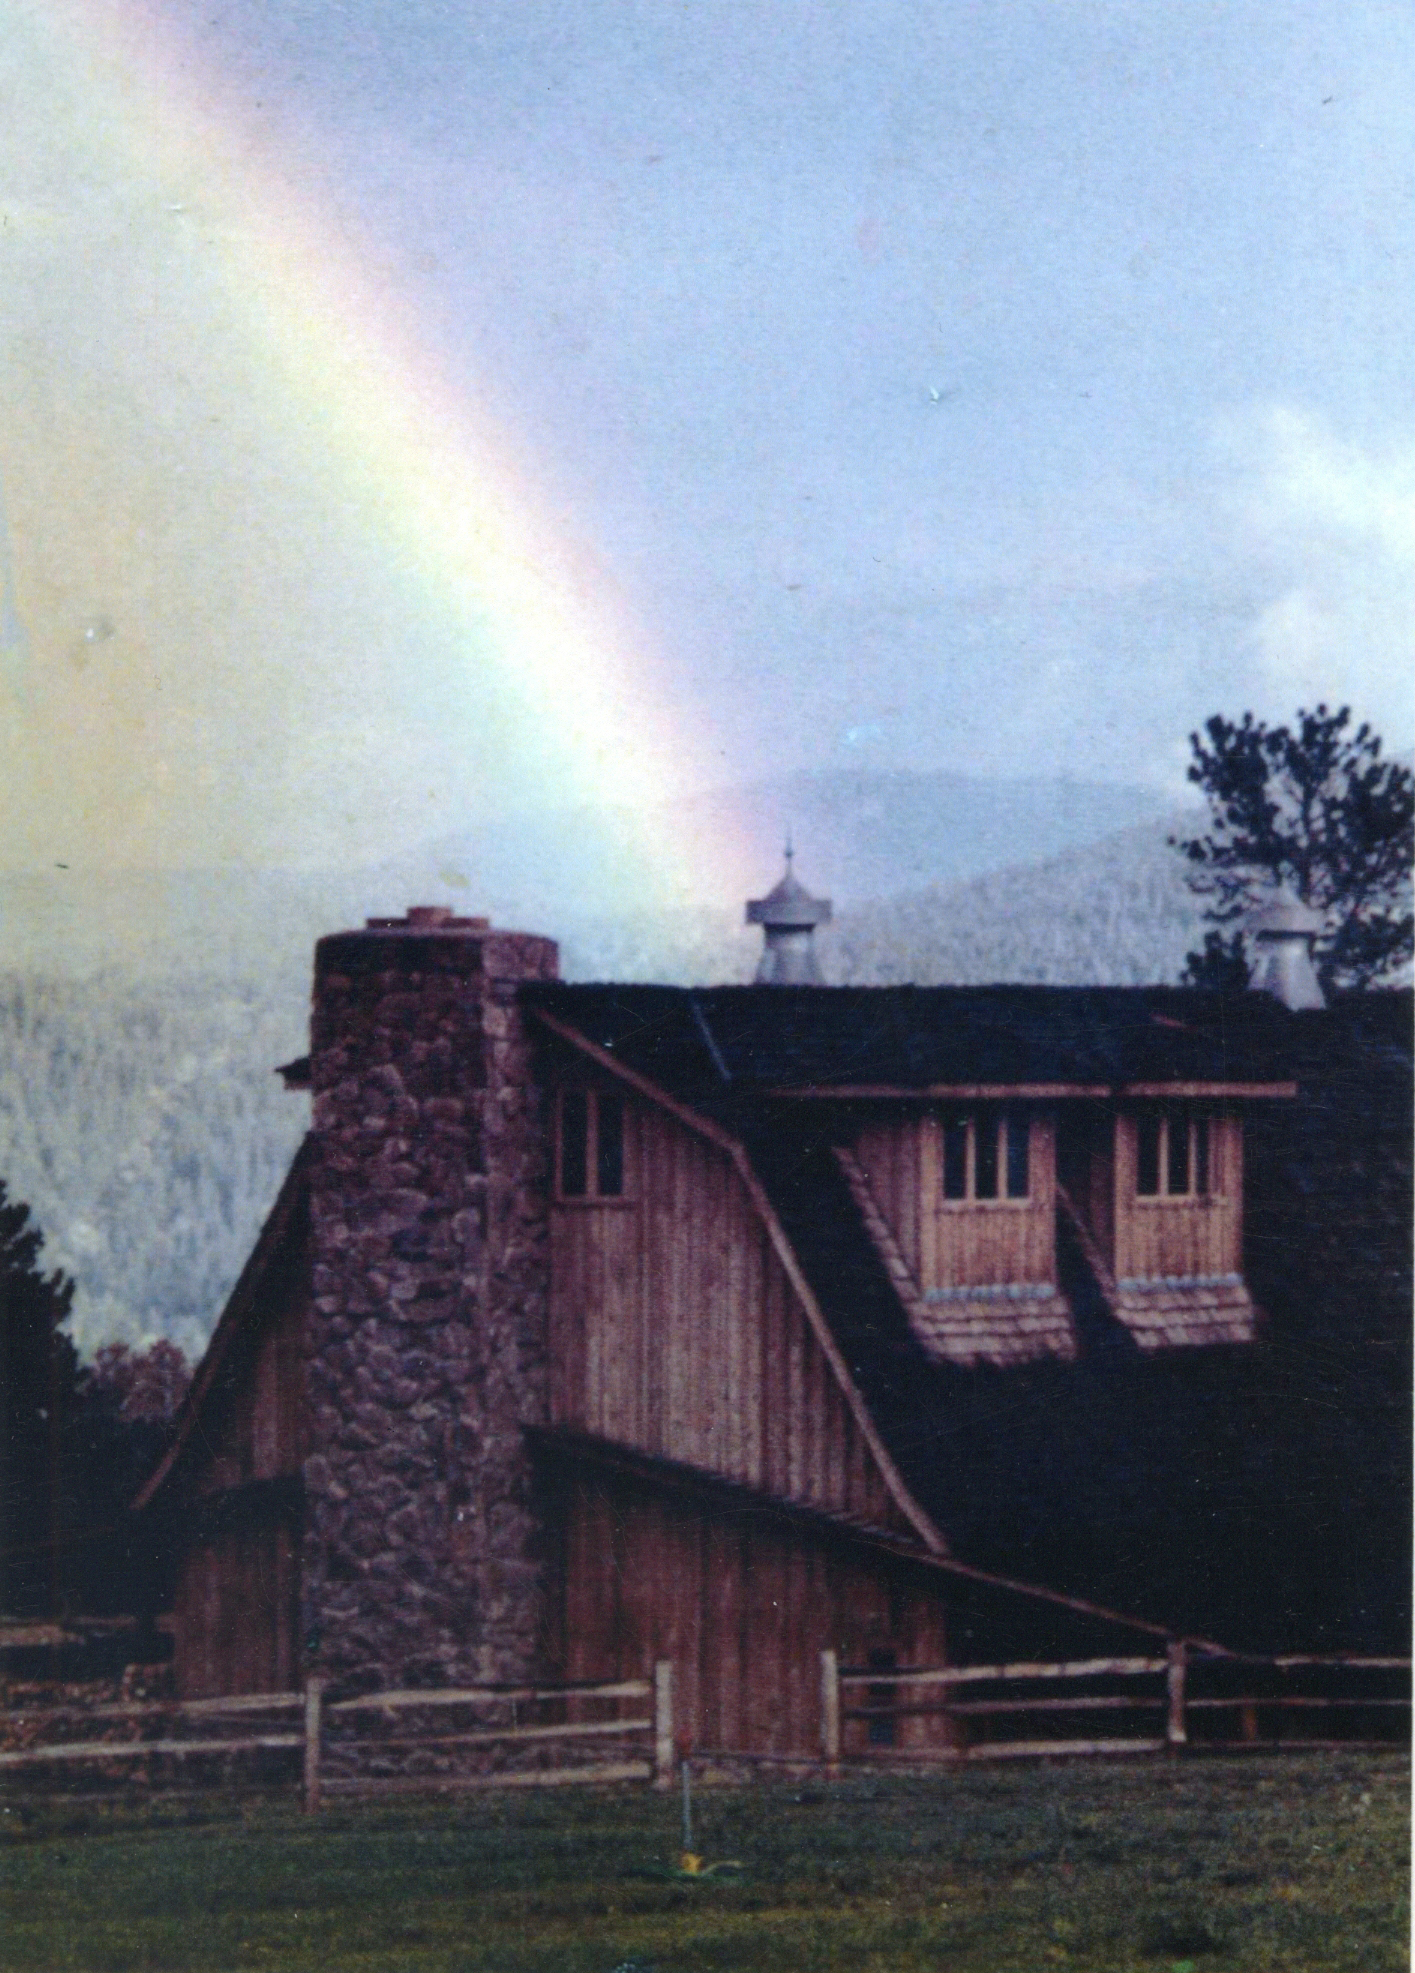 A rainbow stretches over Caribou Ranch in the mid-1970s.